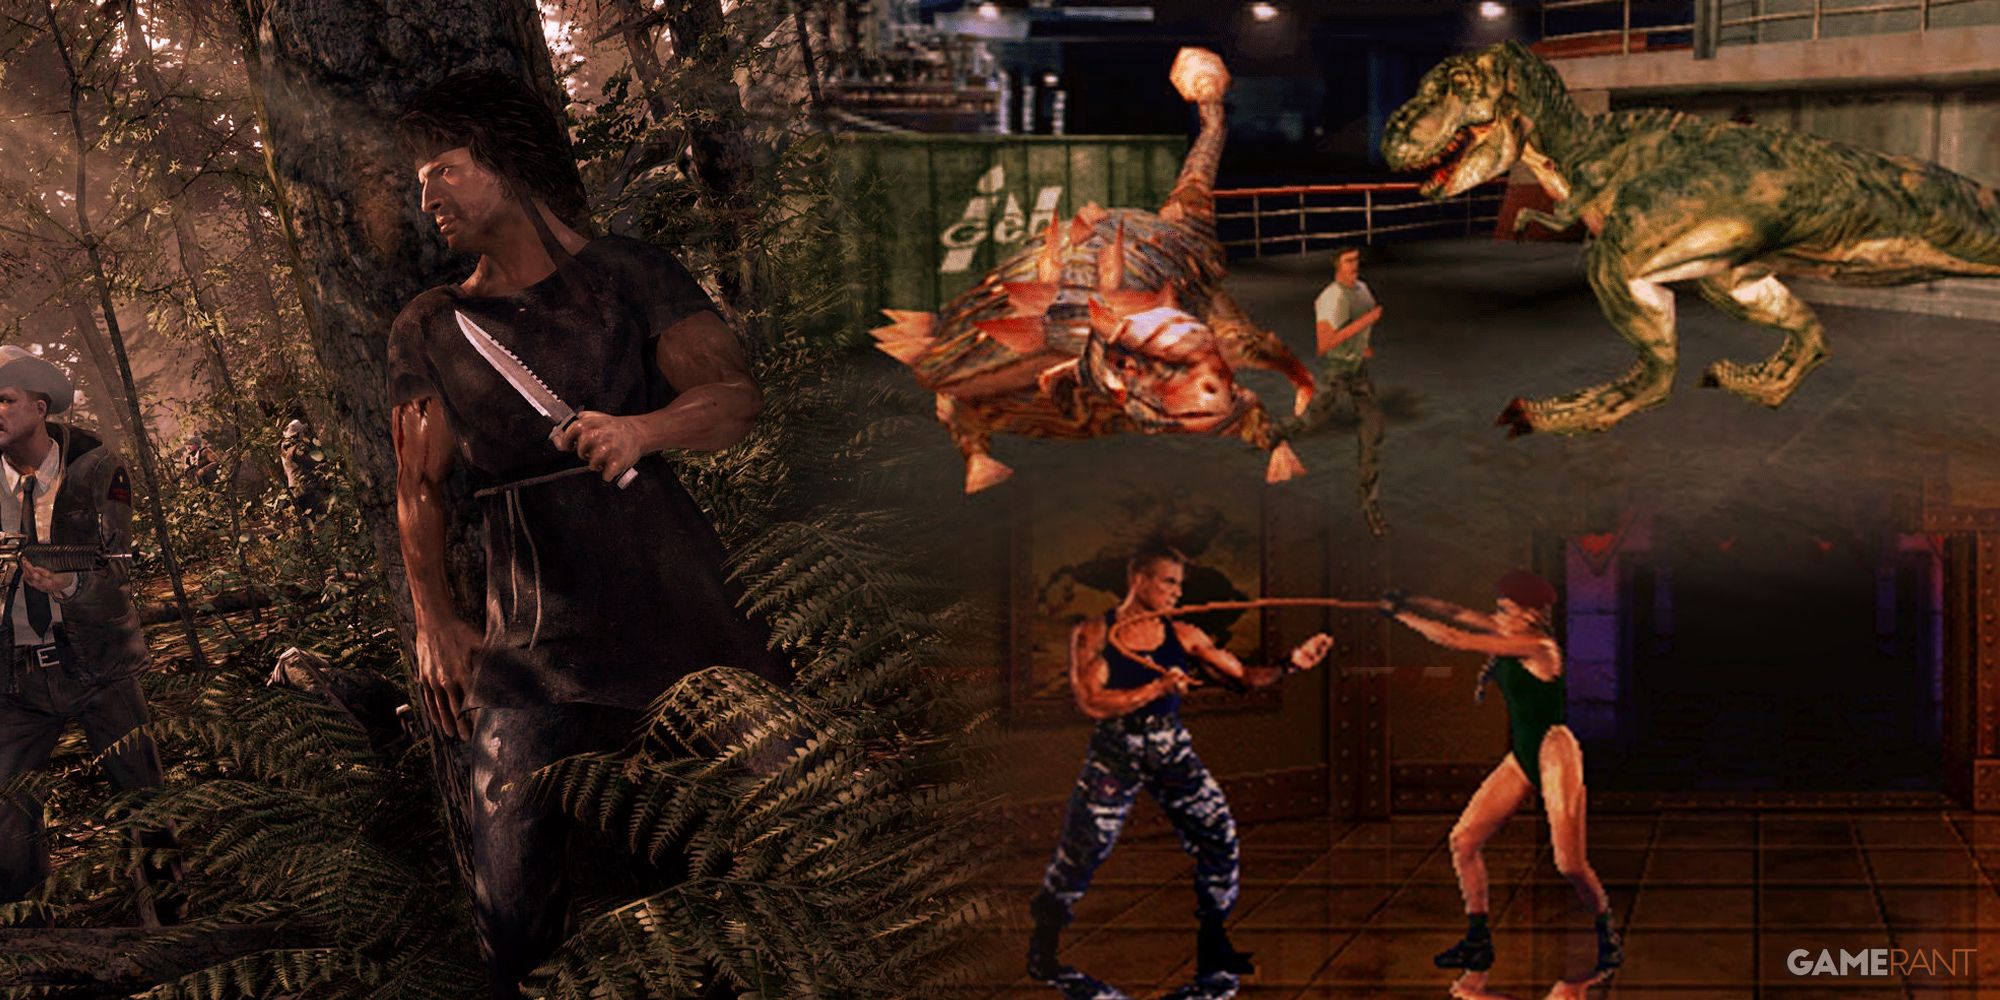 Rambo: The Video Game, Warpath: Jurassic Park, Street Fighter: The Movie